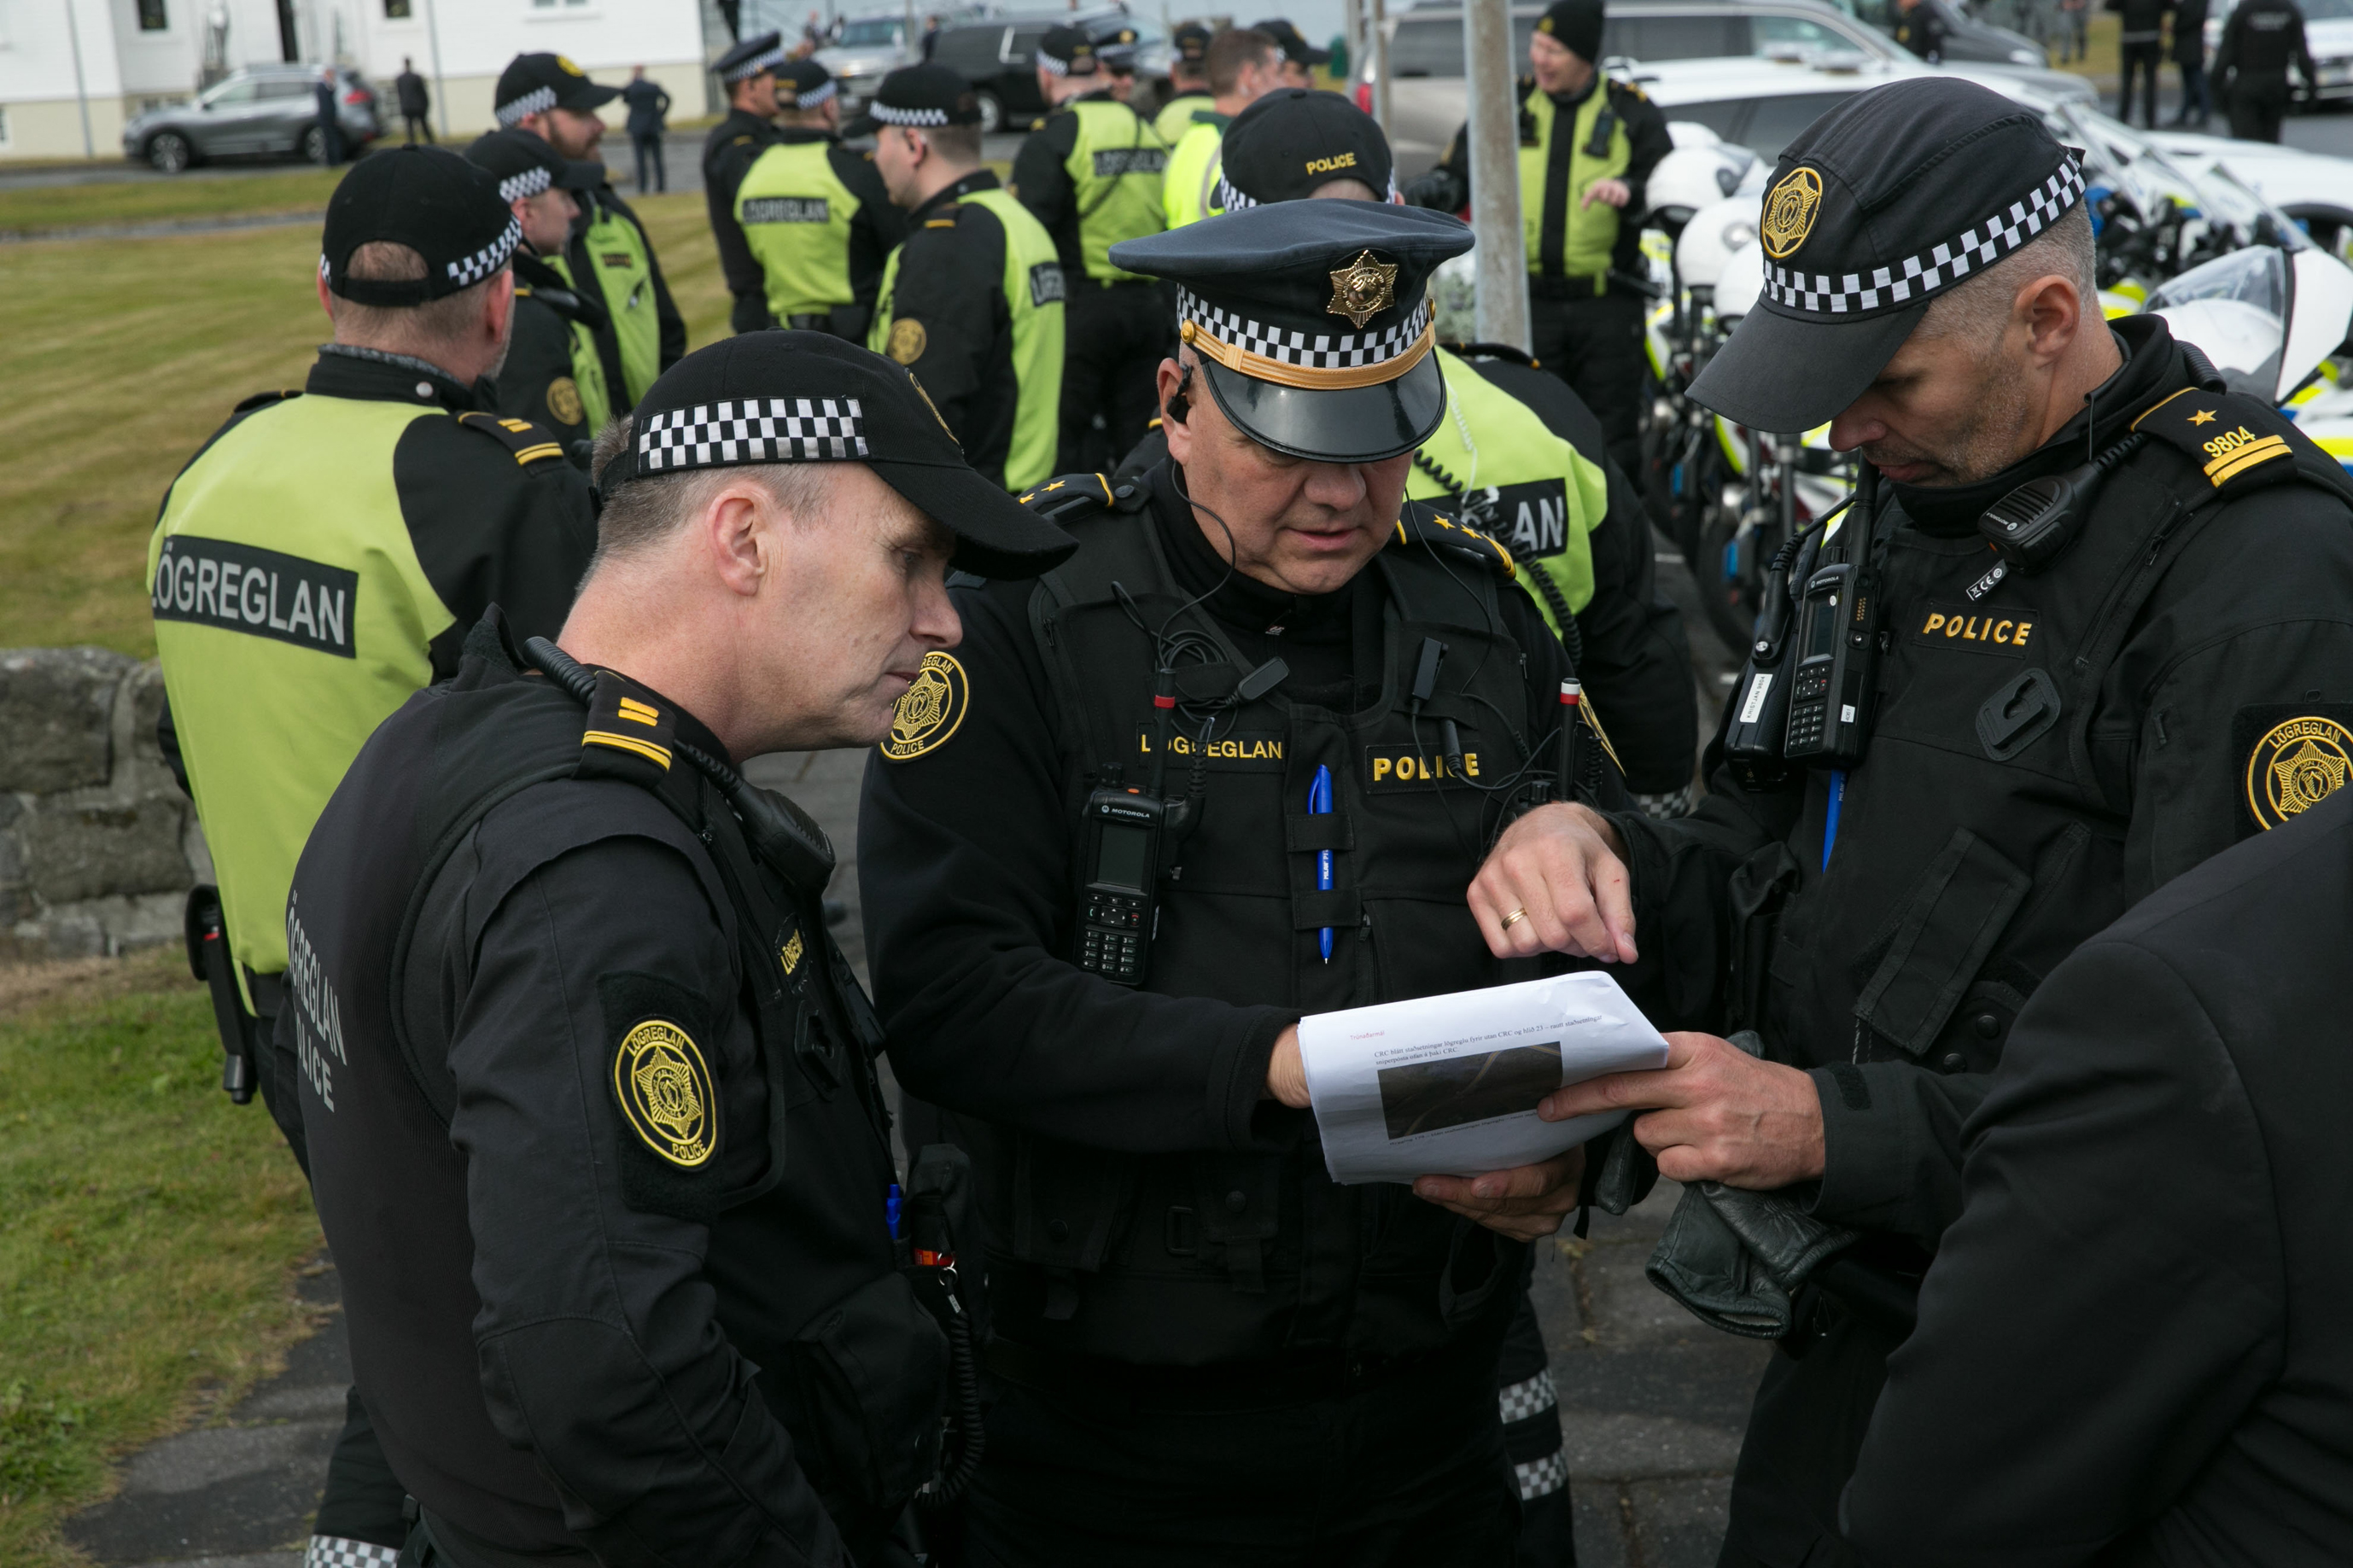 A group of police officers

Description automatically generated with low confidence